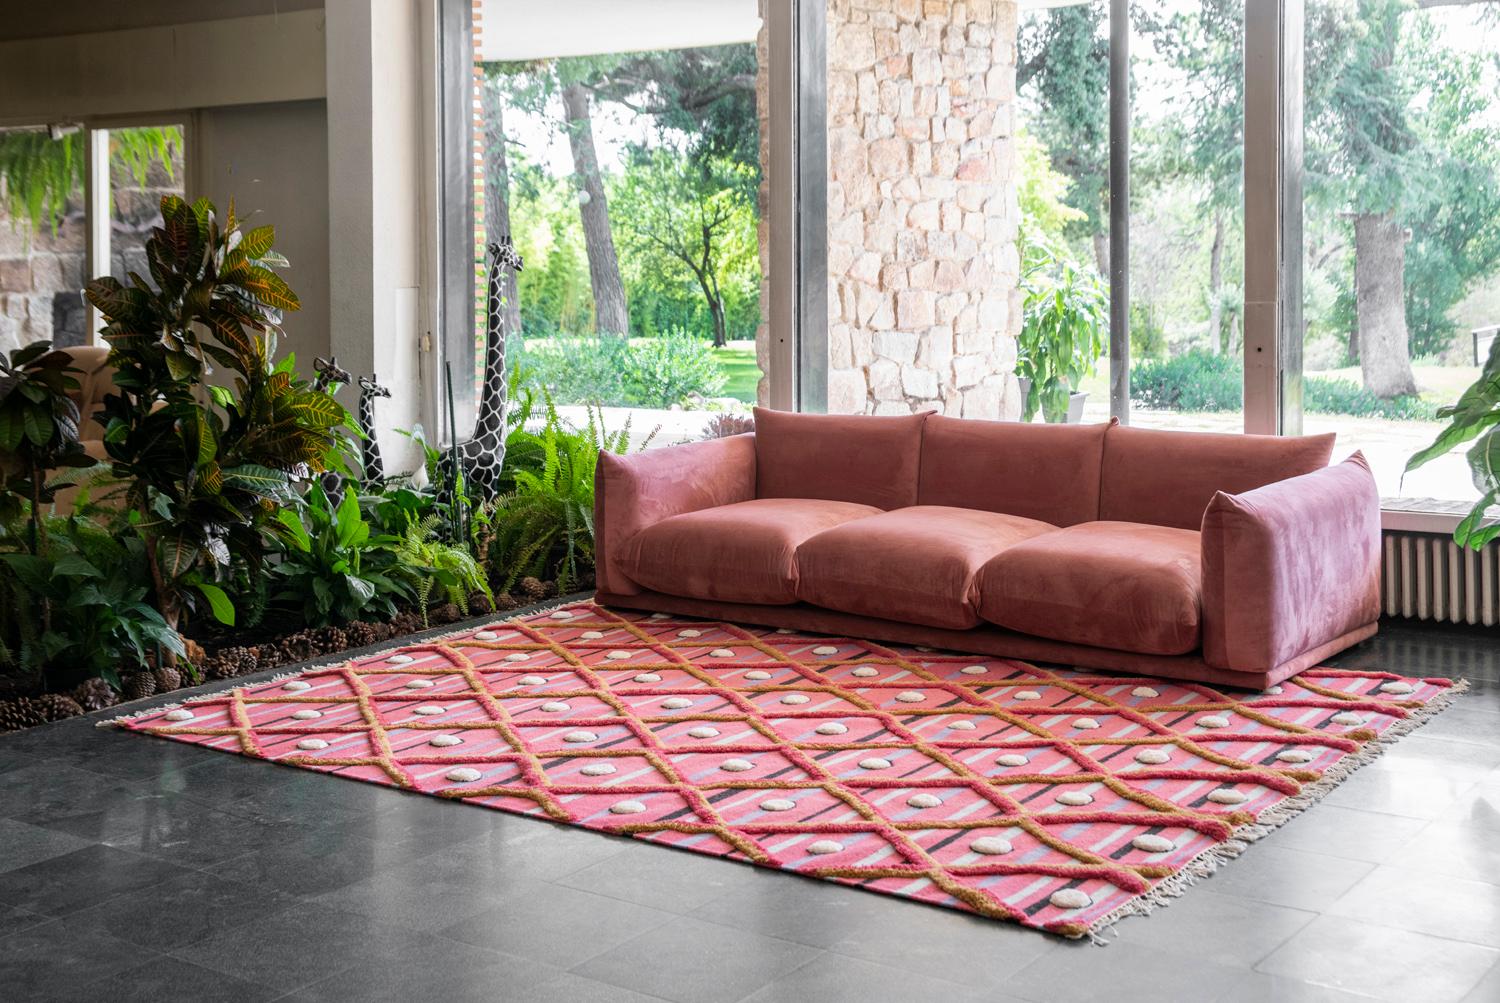 This rug has been ethically hand woven in the finest wool yarns by artisans in north of India, using a traditional weaving technique which defines the design.
This is a flat-weave rug but to highlight the design, part of the pattern is high